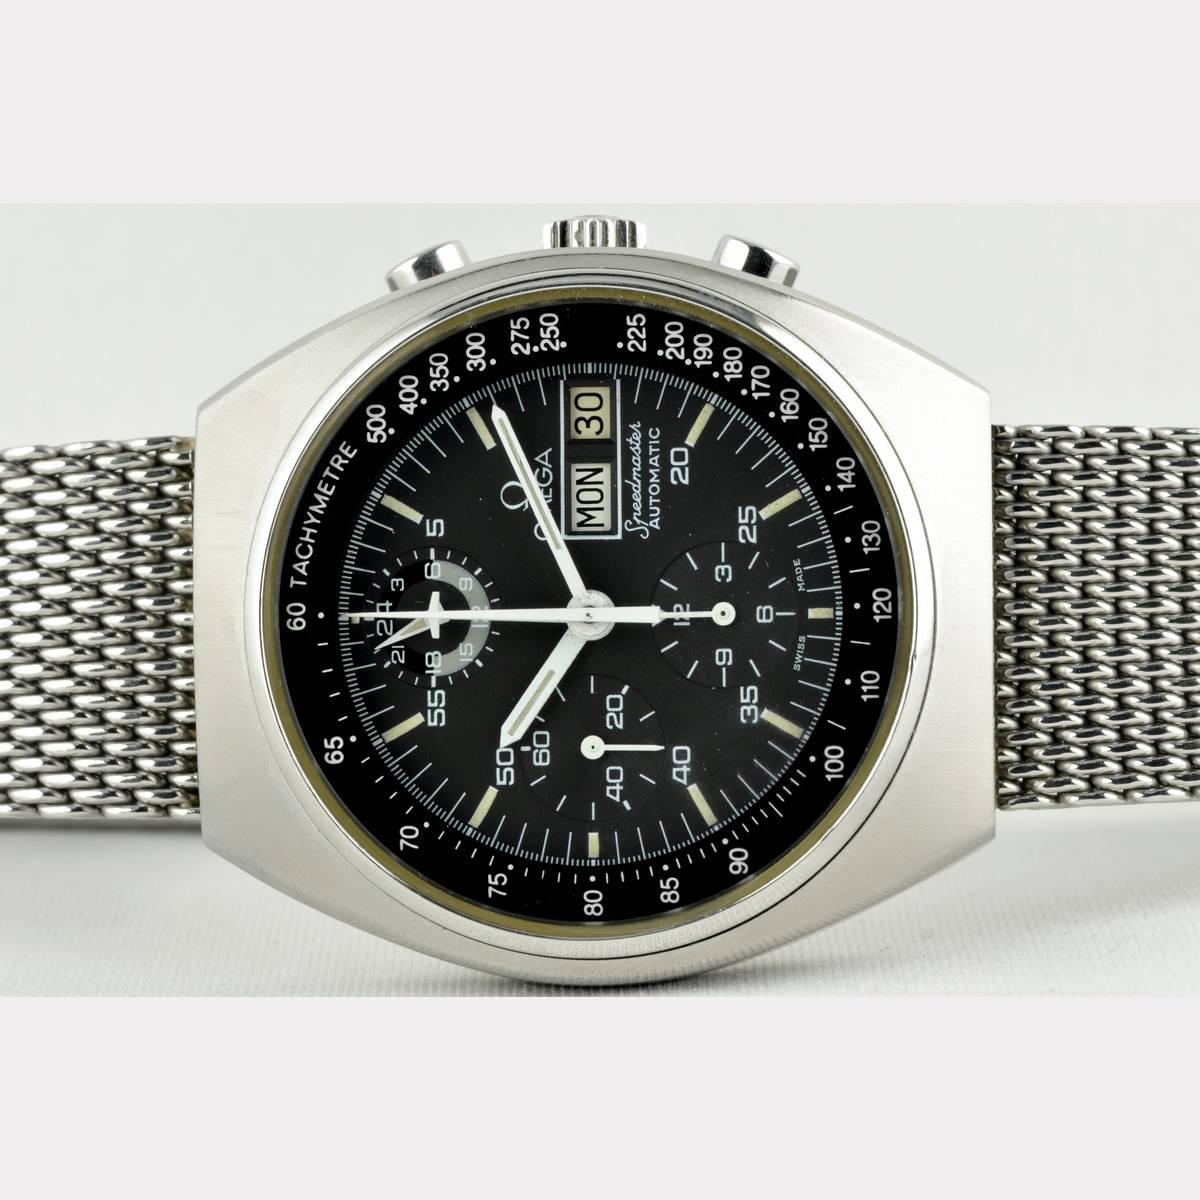 The OMEGA Chronograph has a very well-preserved appearance with date and date. The movement Cal. 1045 is highly reliable and has also been used in a German Aviator´s Chronograph. The whole combination of black face and white hands and indices stands